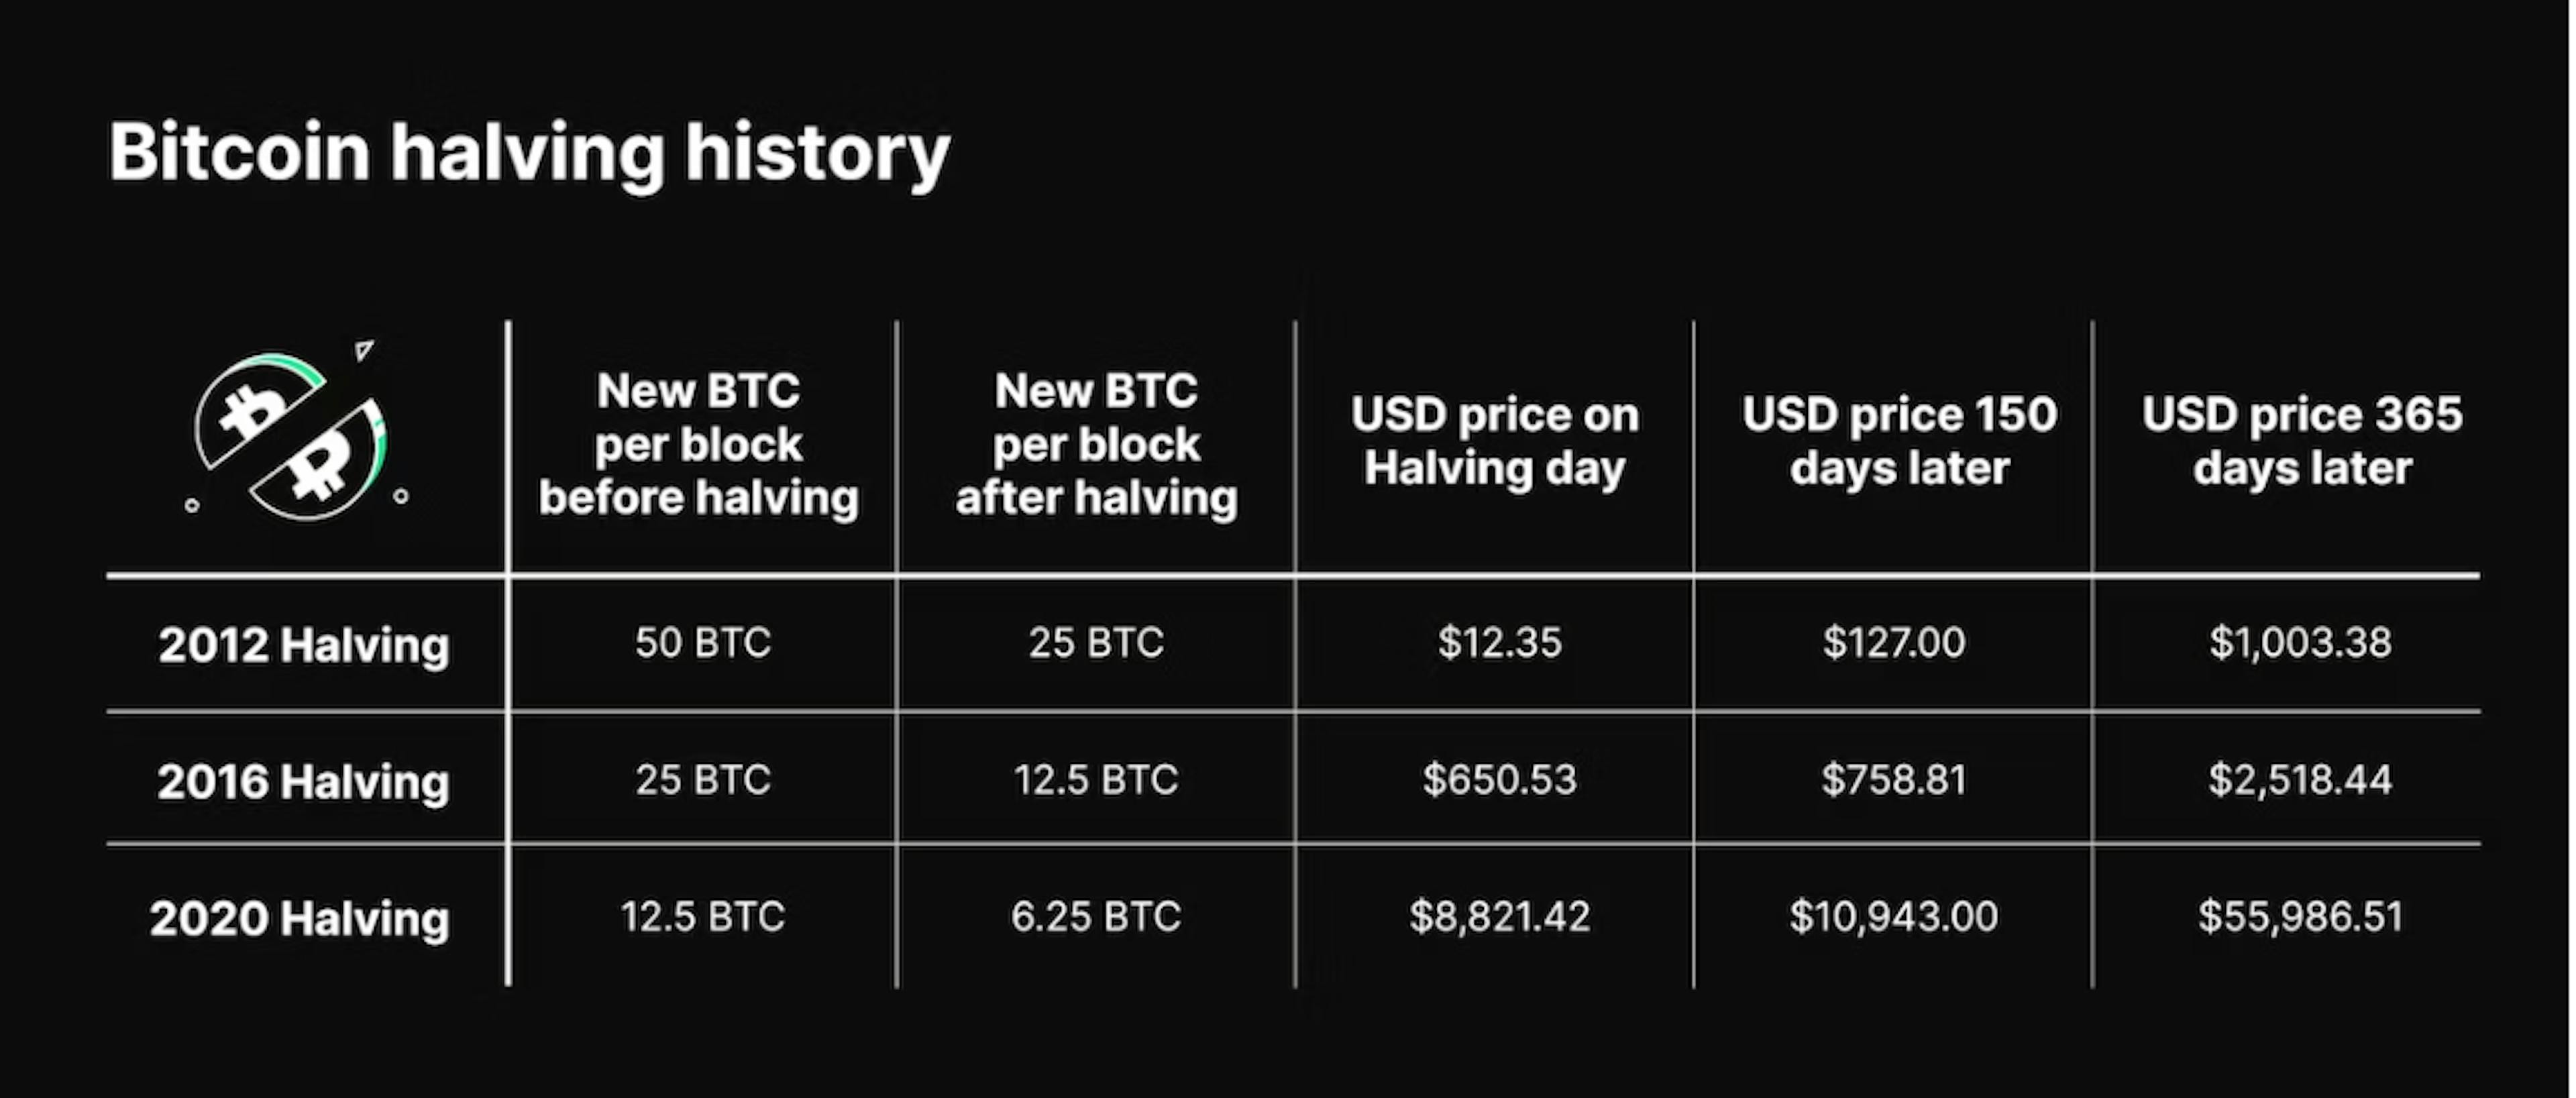 Source: https://www.bitpanda.com/academy/en/lessons/what-is-a-bitcoin-halving-and-what-happens-on-the-network/ 